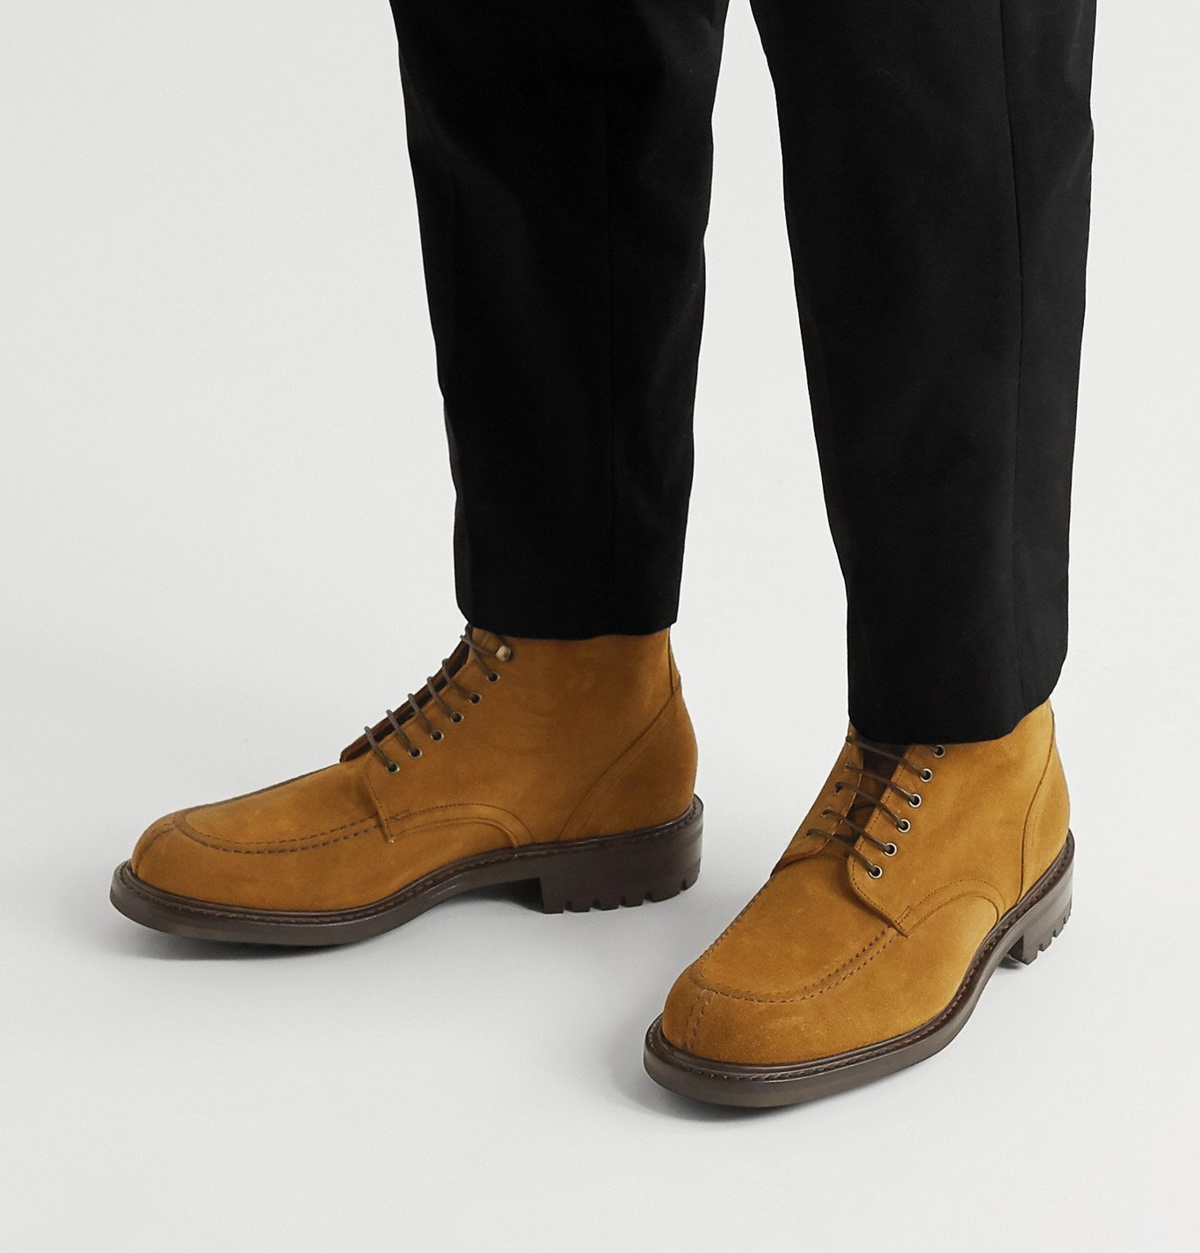 MR P. Larry Split-Toe Regenerated Suede by evolo® Chukka Boots for Men